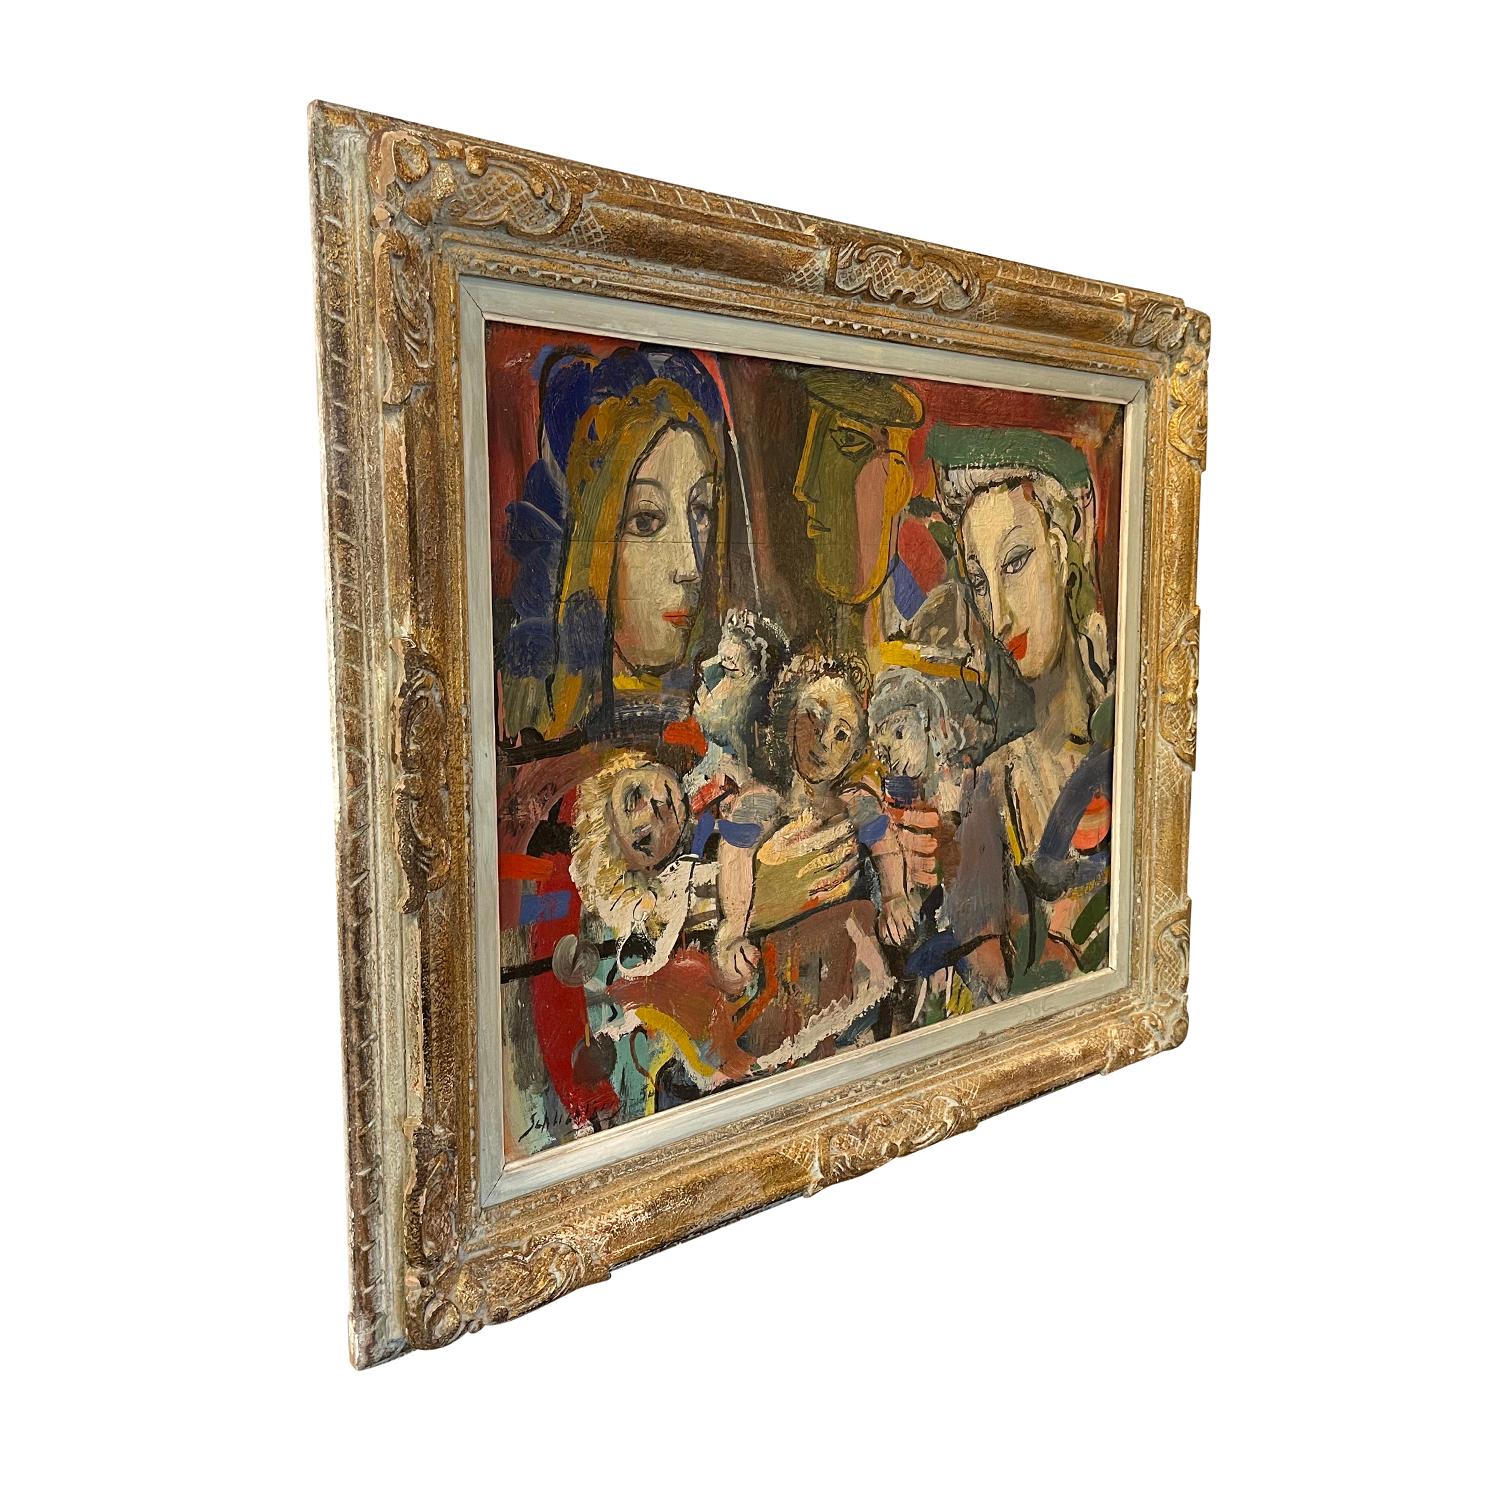 A colorful, oil on wood painting in the manner of Marc Chagall in a hand carved gilded wood frame, in good condition. The vintage 